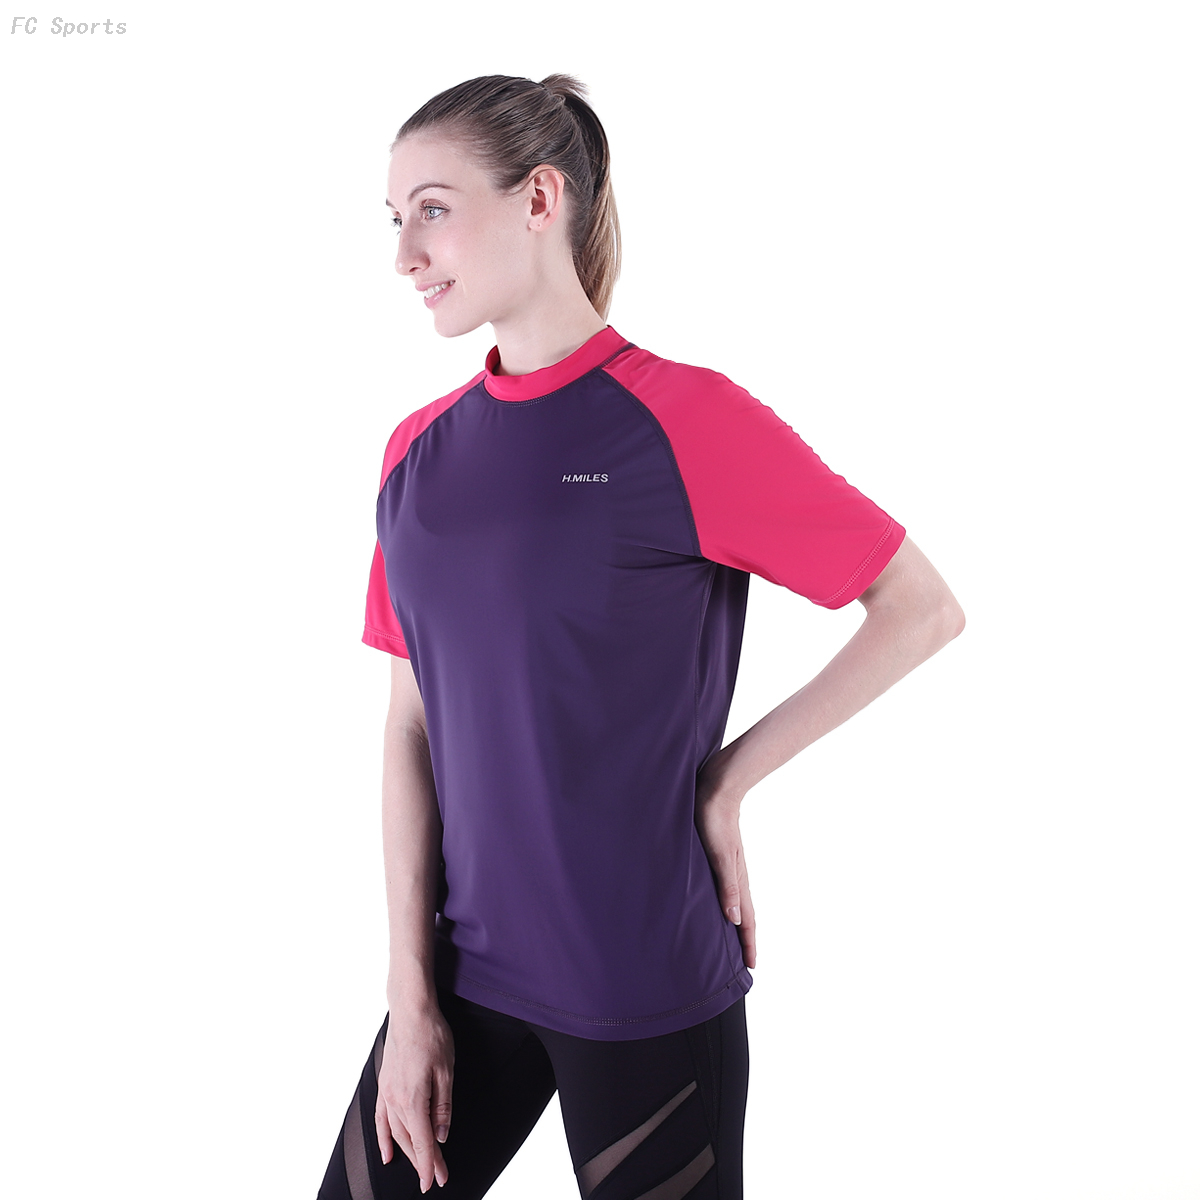 FC Sports Tee Shirt Women Slim Breathable Surf Suit Style Outdoor Clothes Wholesale